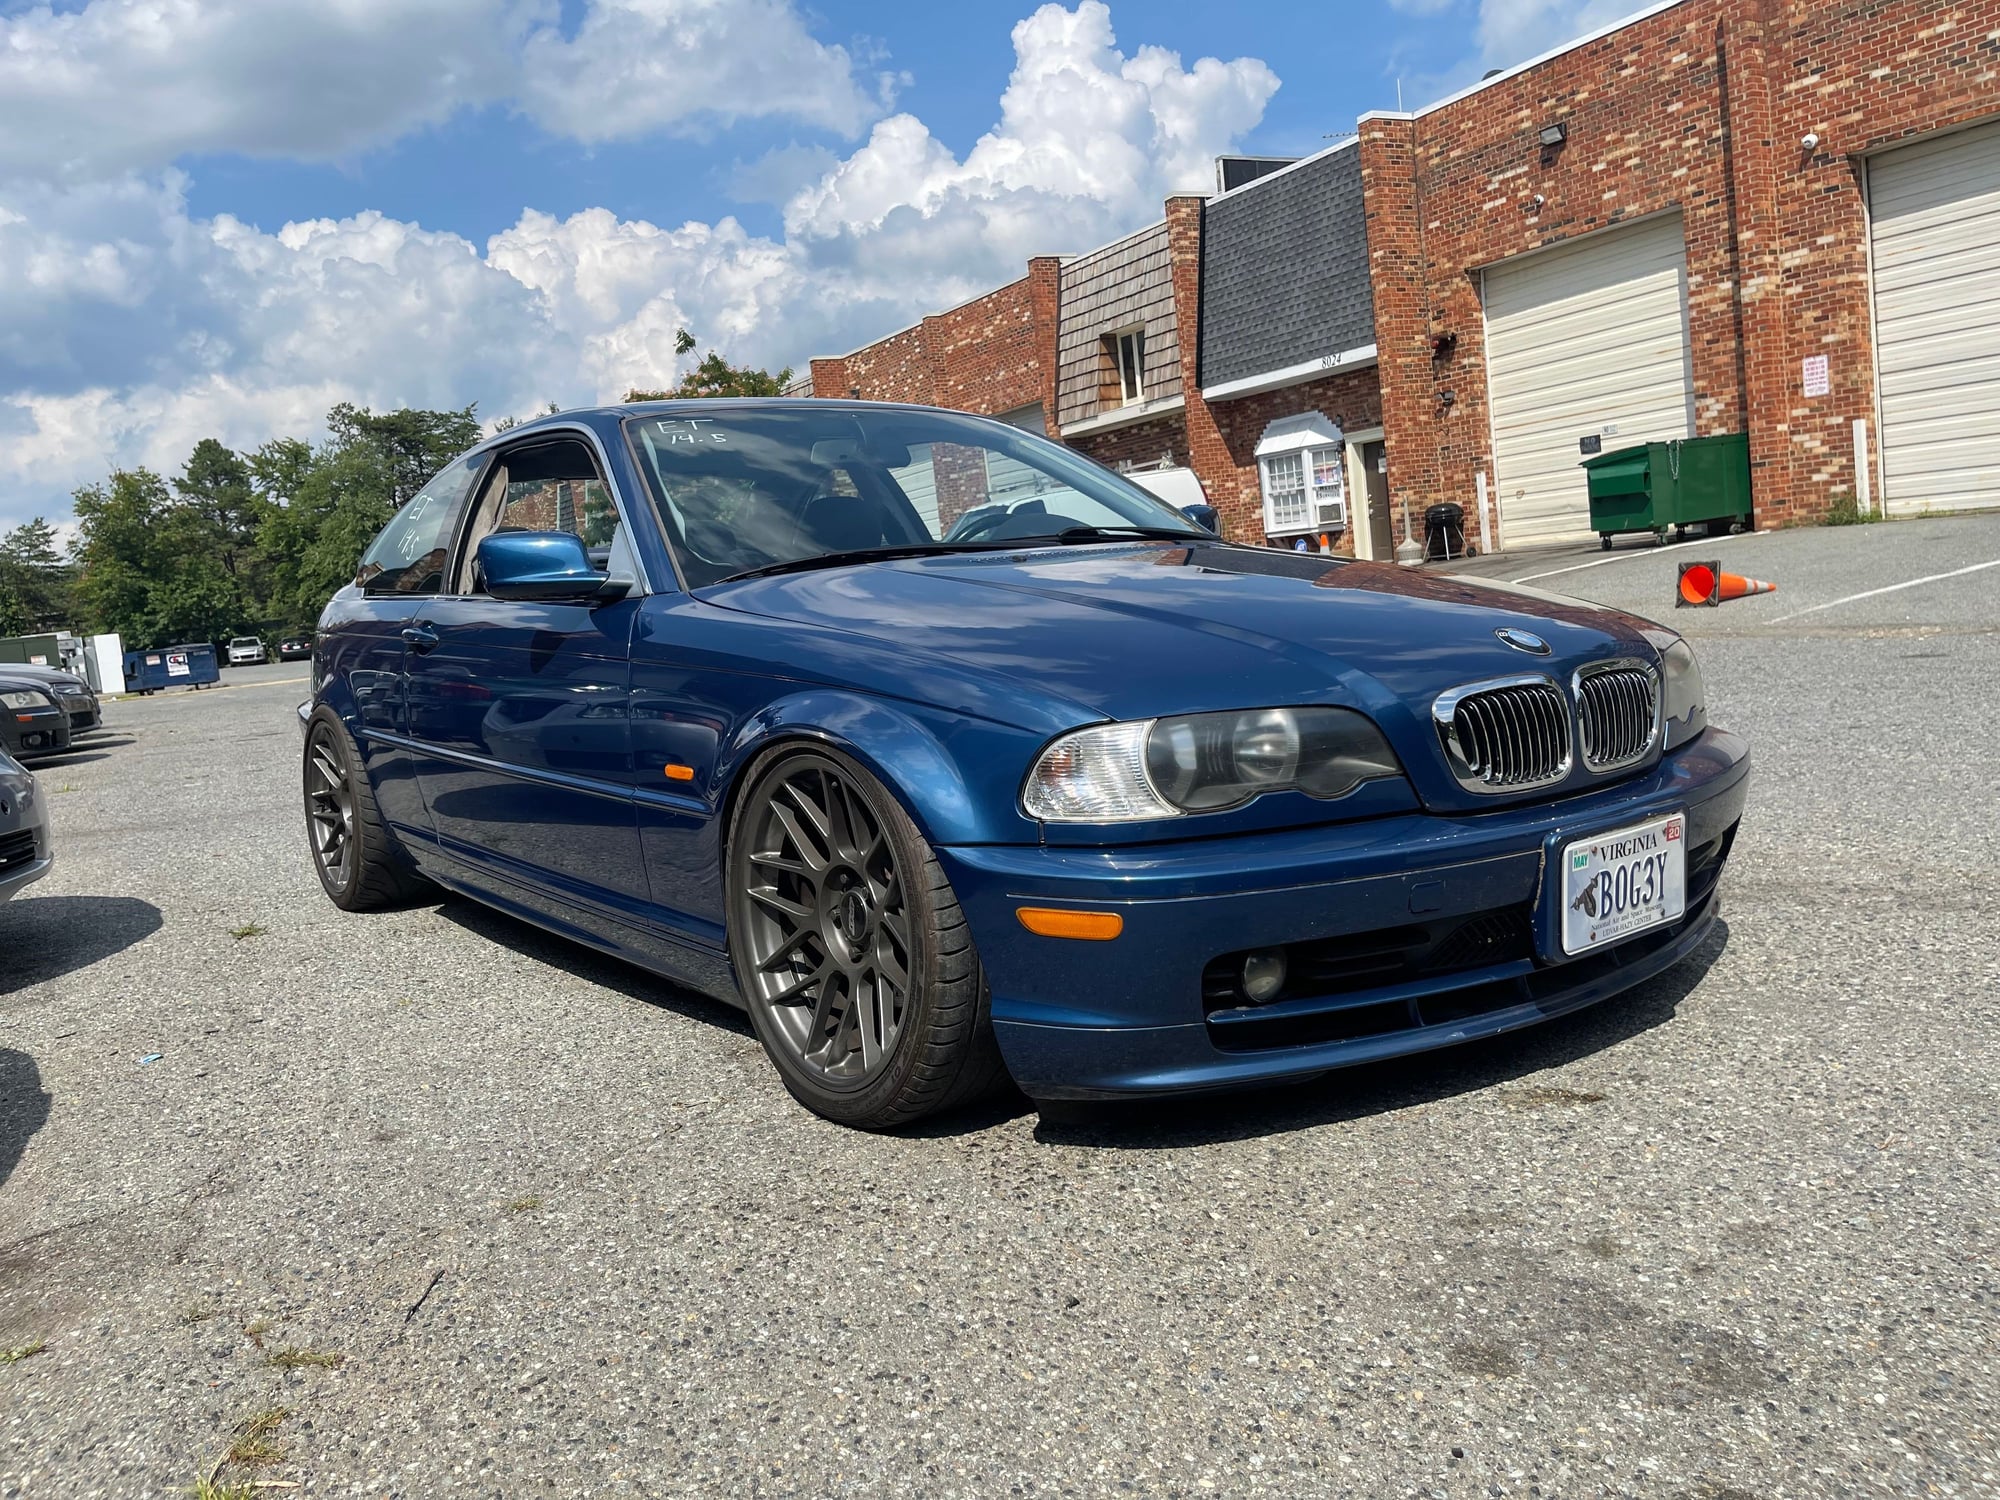 2001 BMW 325Ci - LS Swapped E46 BMW - Used - VIN 09876543211234567 - 150,000 Miles - 8 cyl - 2WD - Manual - Coupe - Blue - Oxon Hill, MD 20745, United States